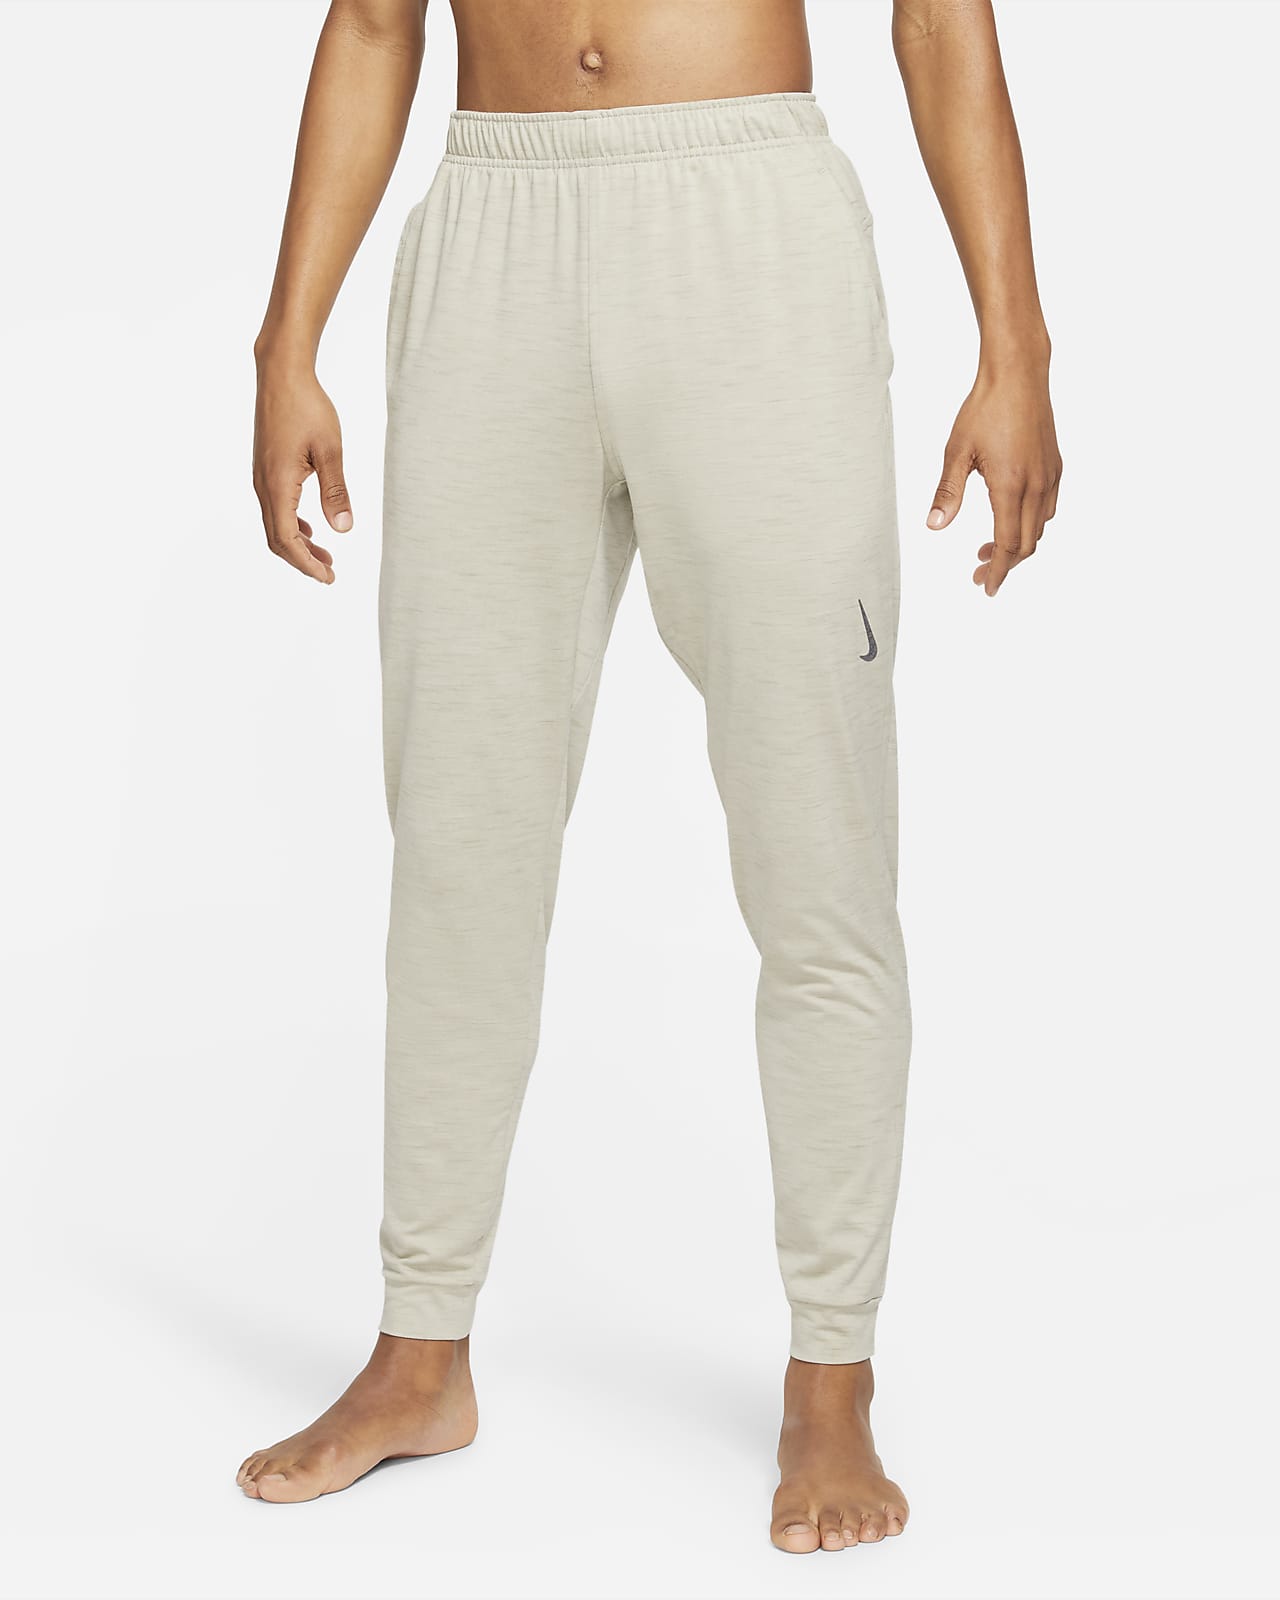 Buy Exclusive Nike Trousers  306 products  FASHIOLAin